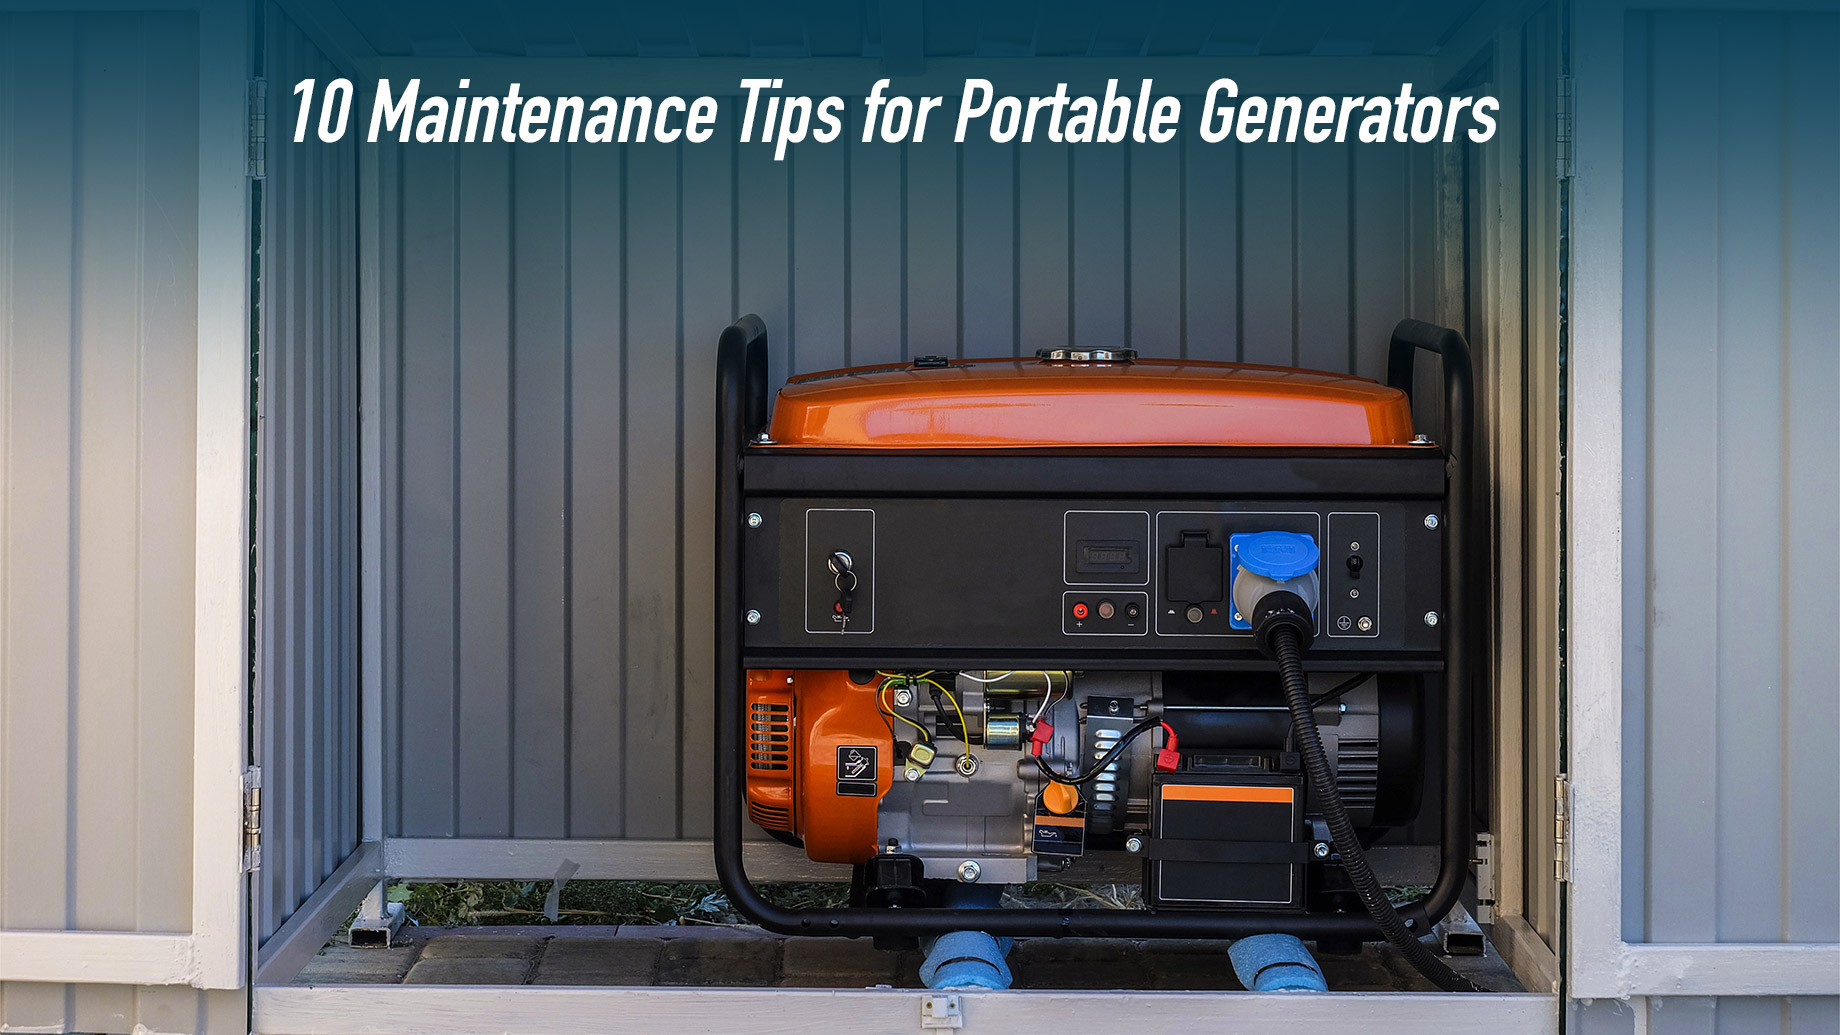 Common Pitfalls To Avoid When Selling Your Generator